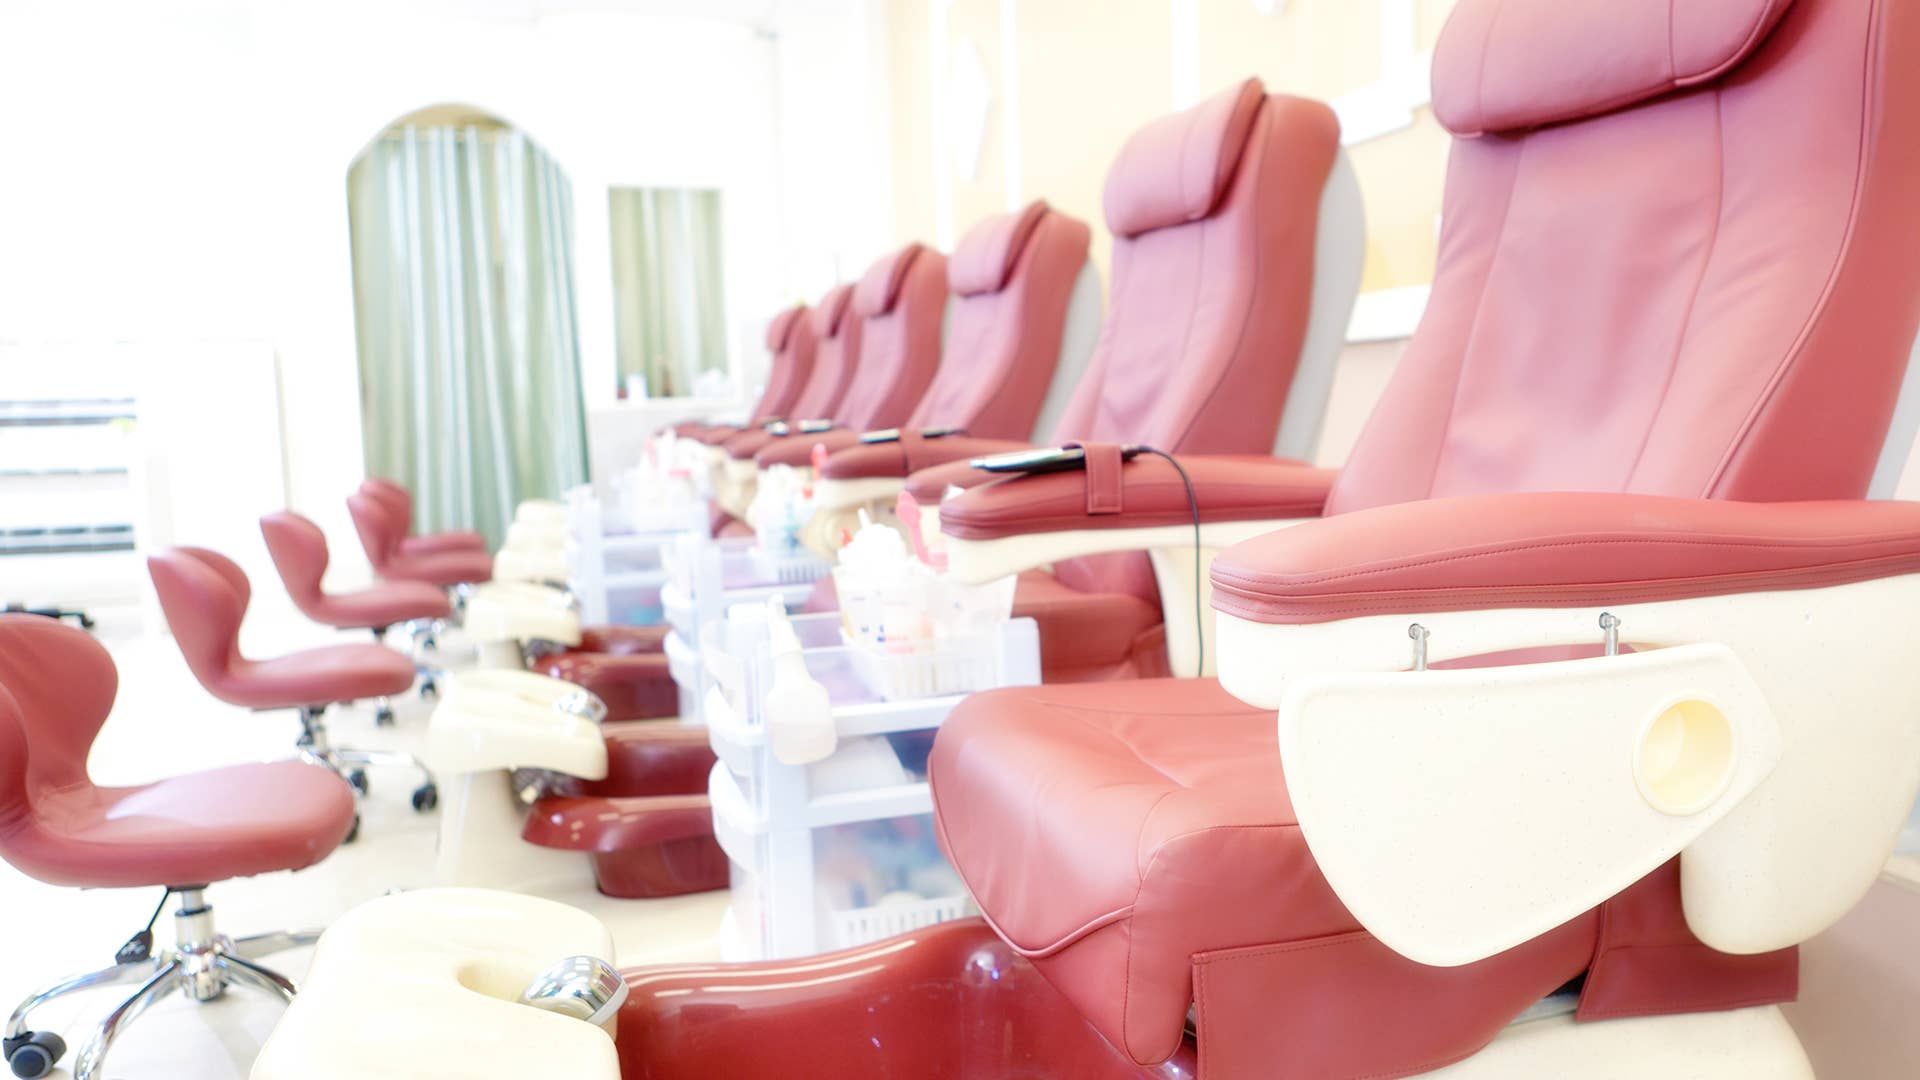 A row of pedicure massage chairs in a row in a clean, bright nail salon small business shop.